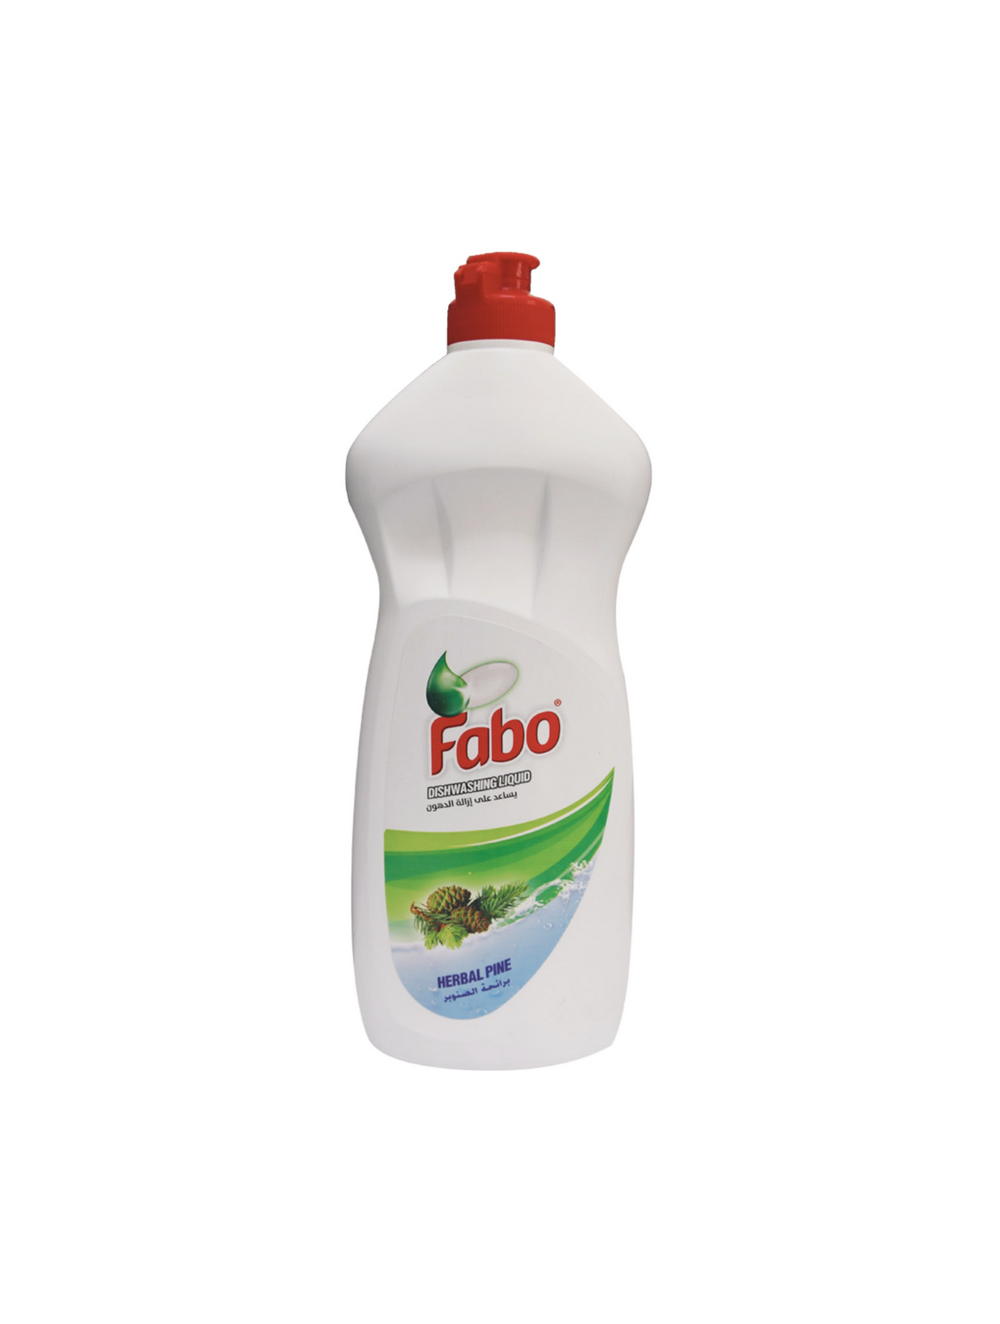 fabo-products_page-0016